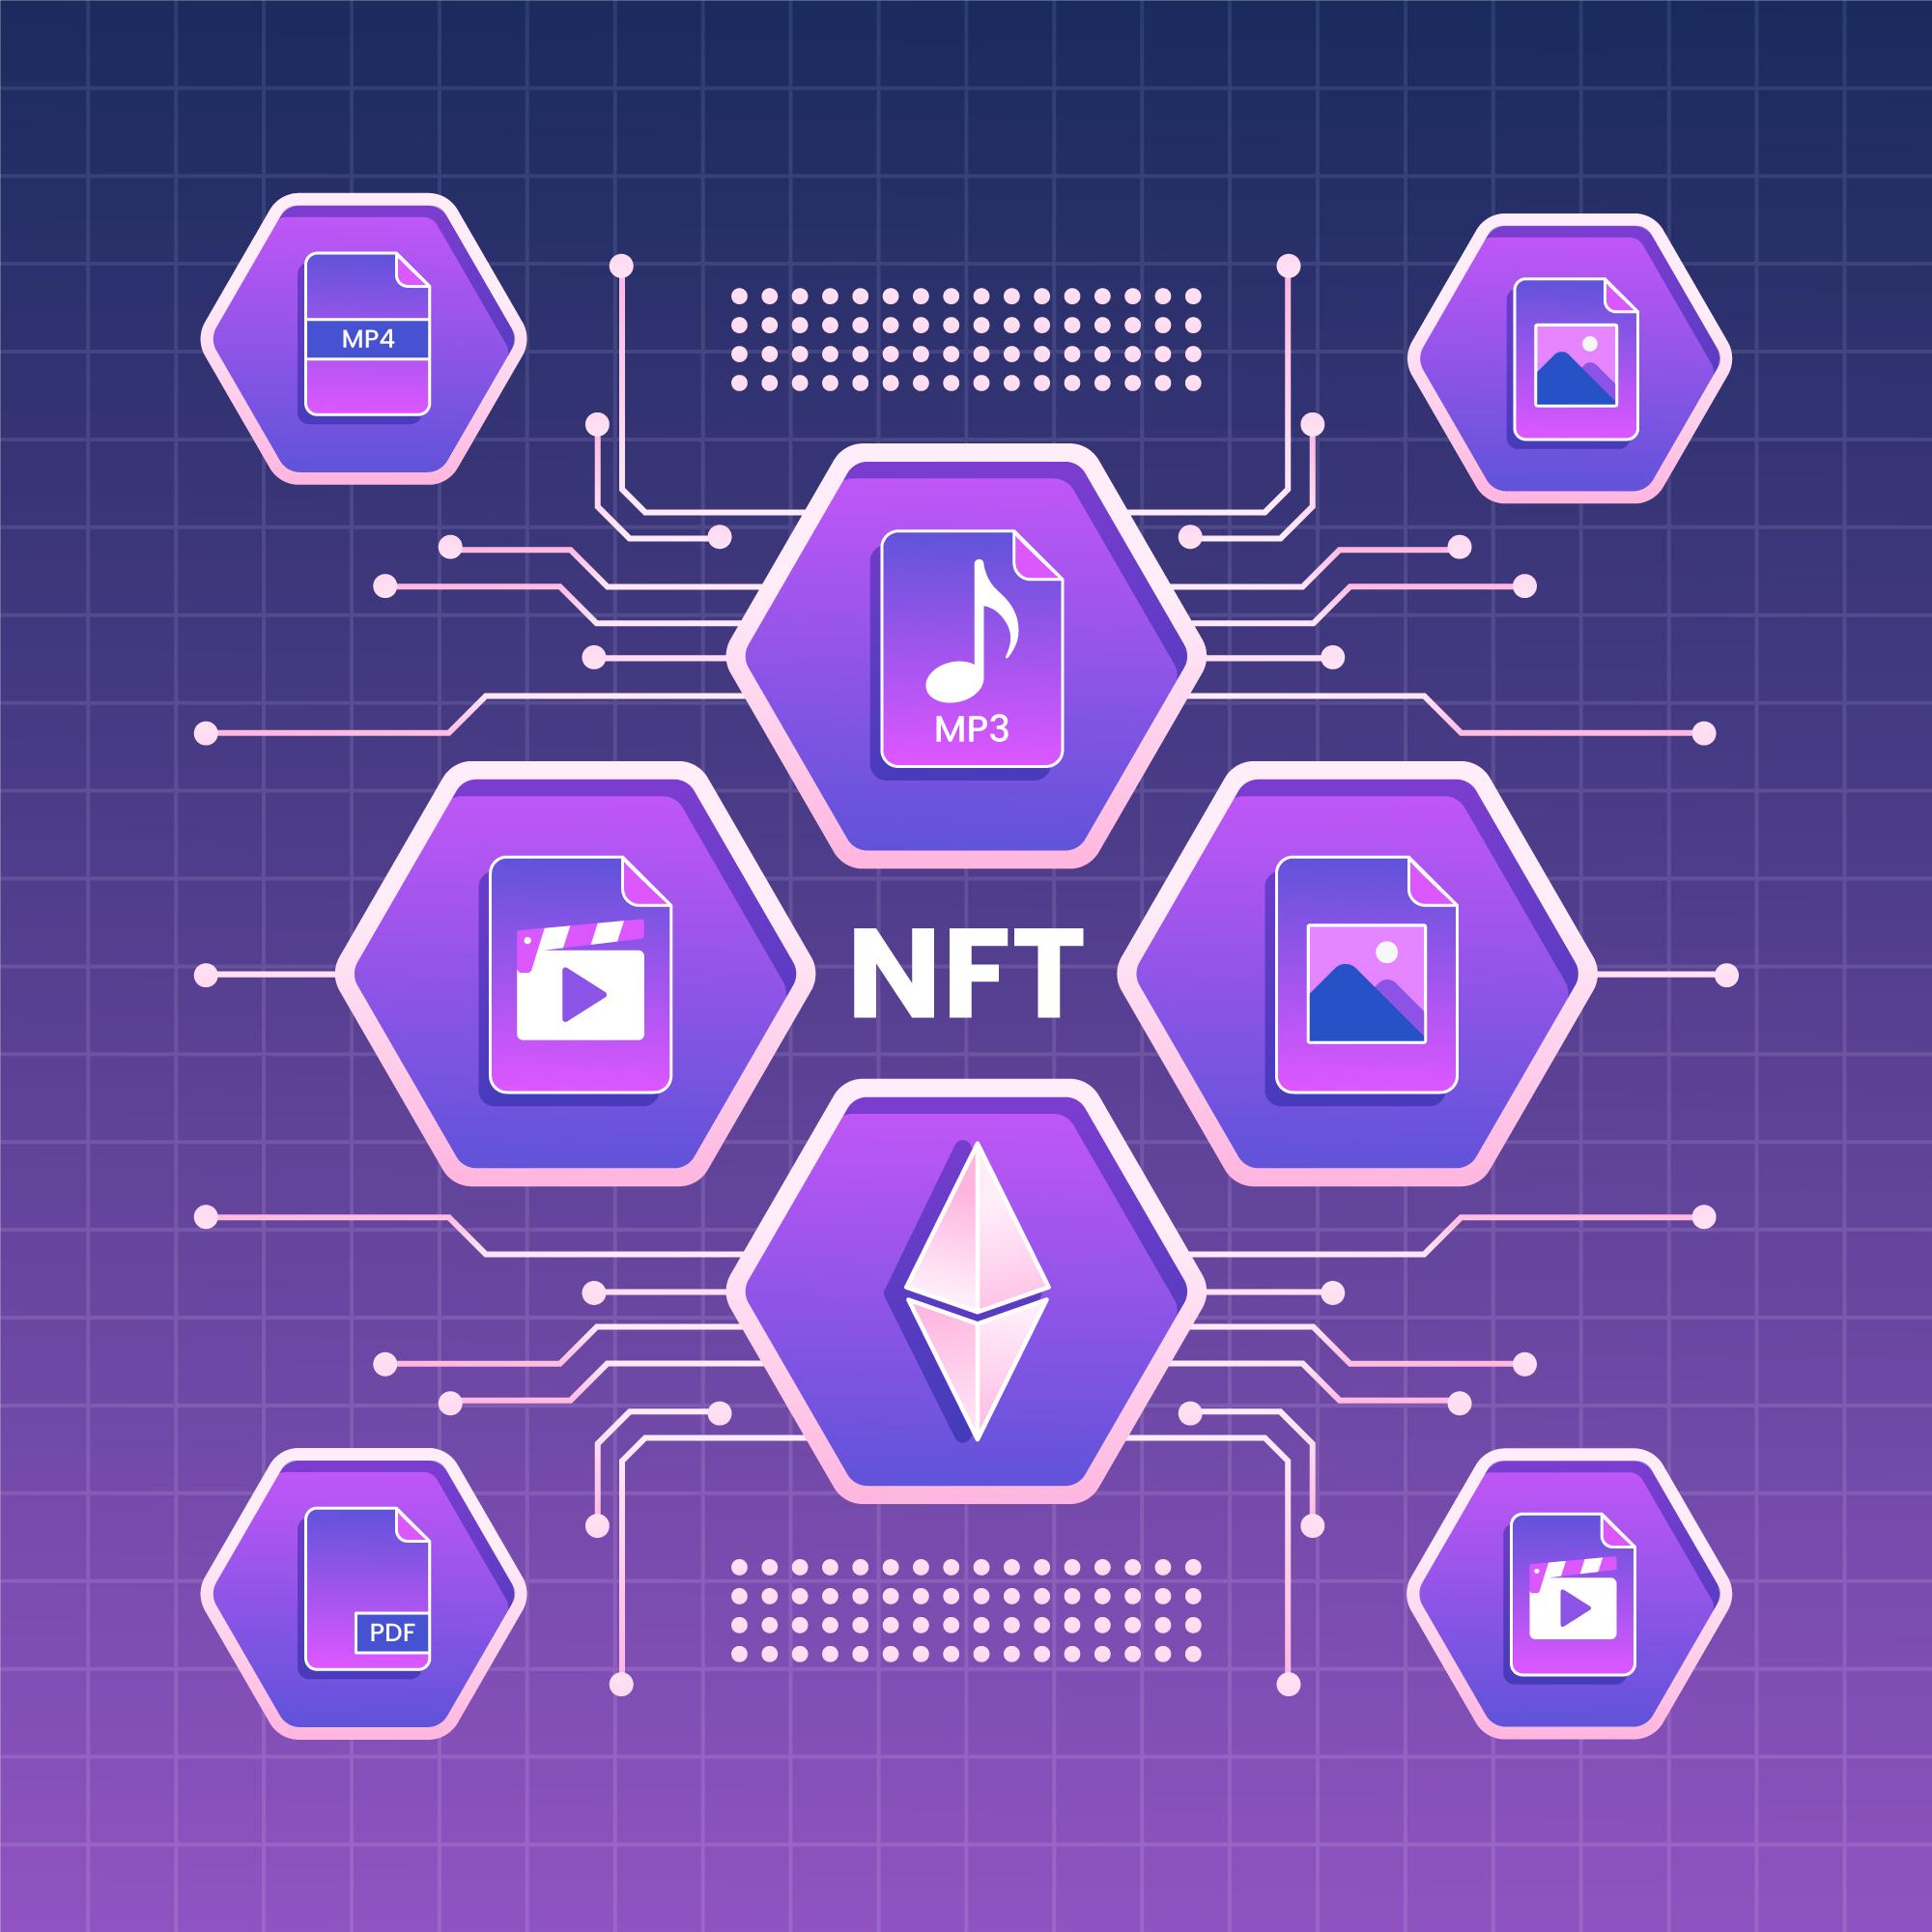 Create NFT Exchange Platform With A Pioneer Crypto-Industry